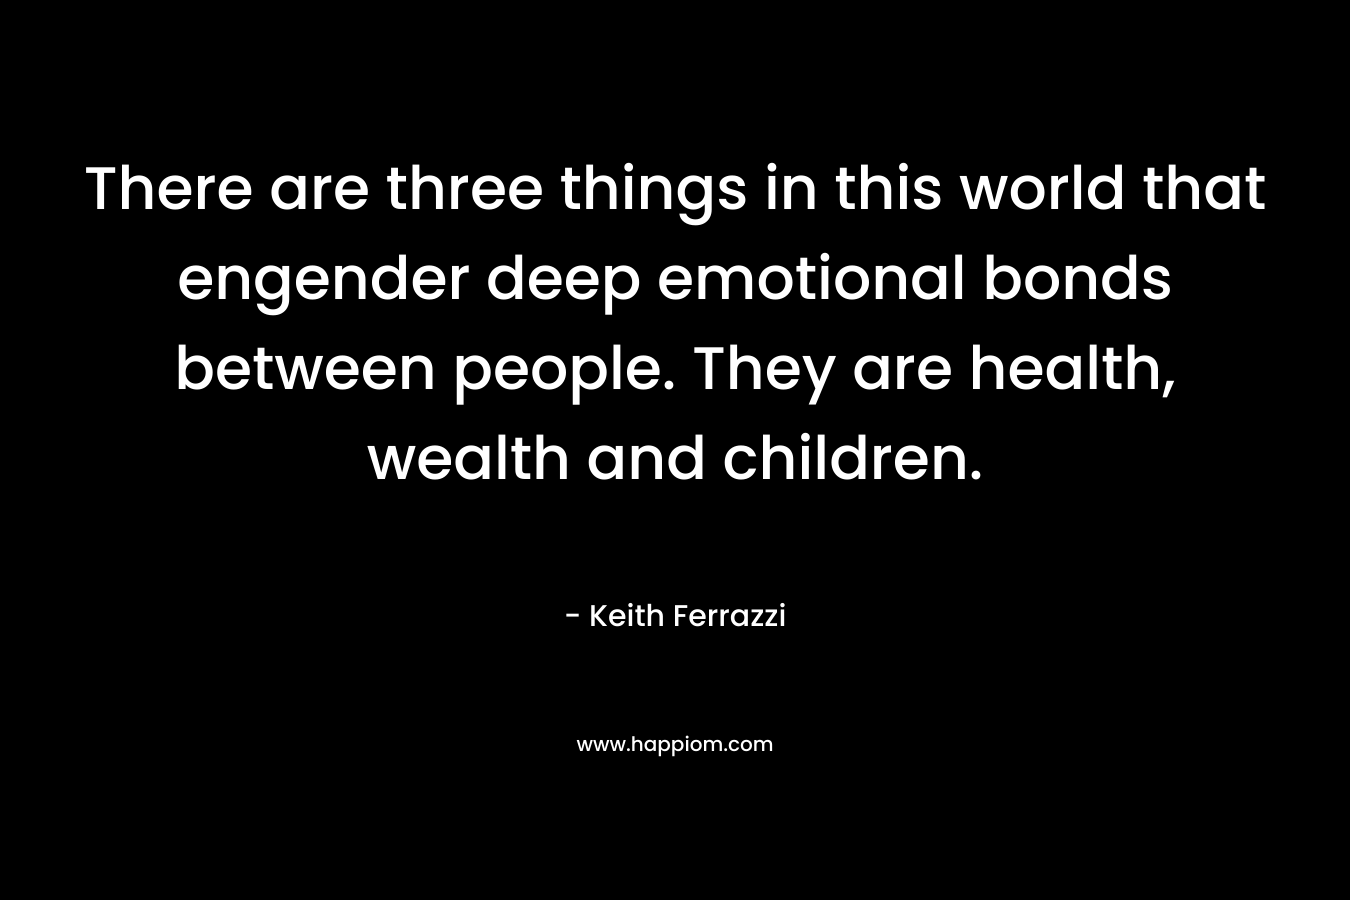 There are three things in this world that engender deep emotional bonds between people. They are health, wealth and children.